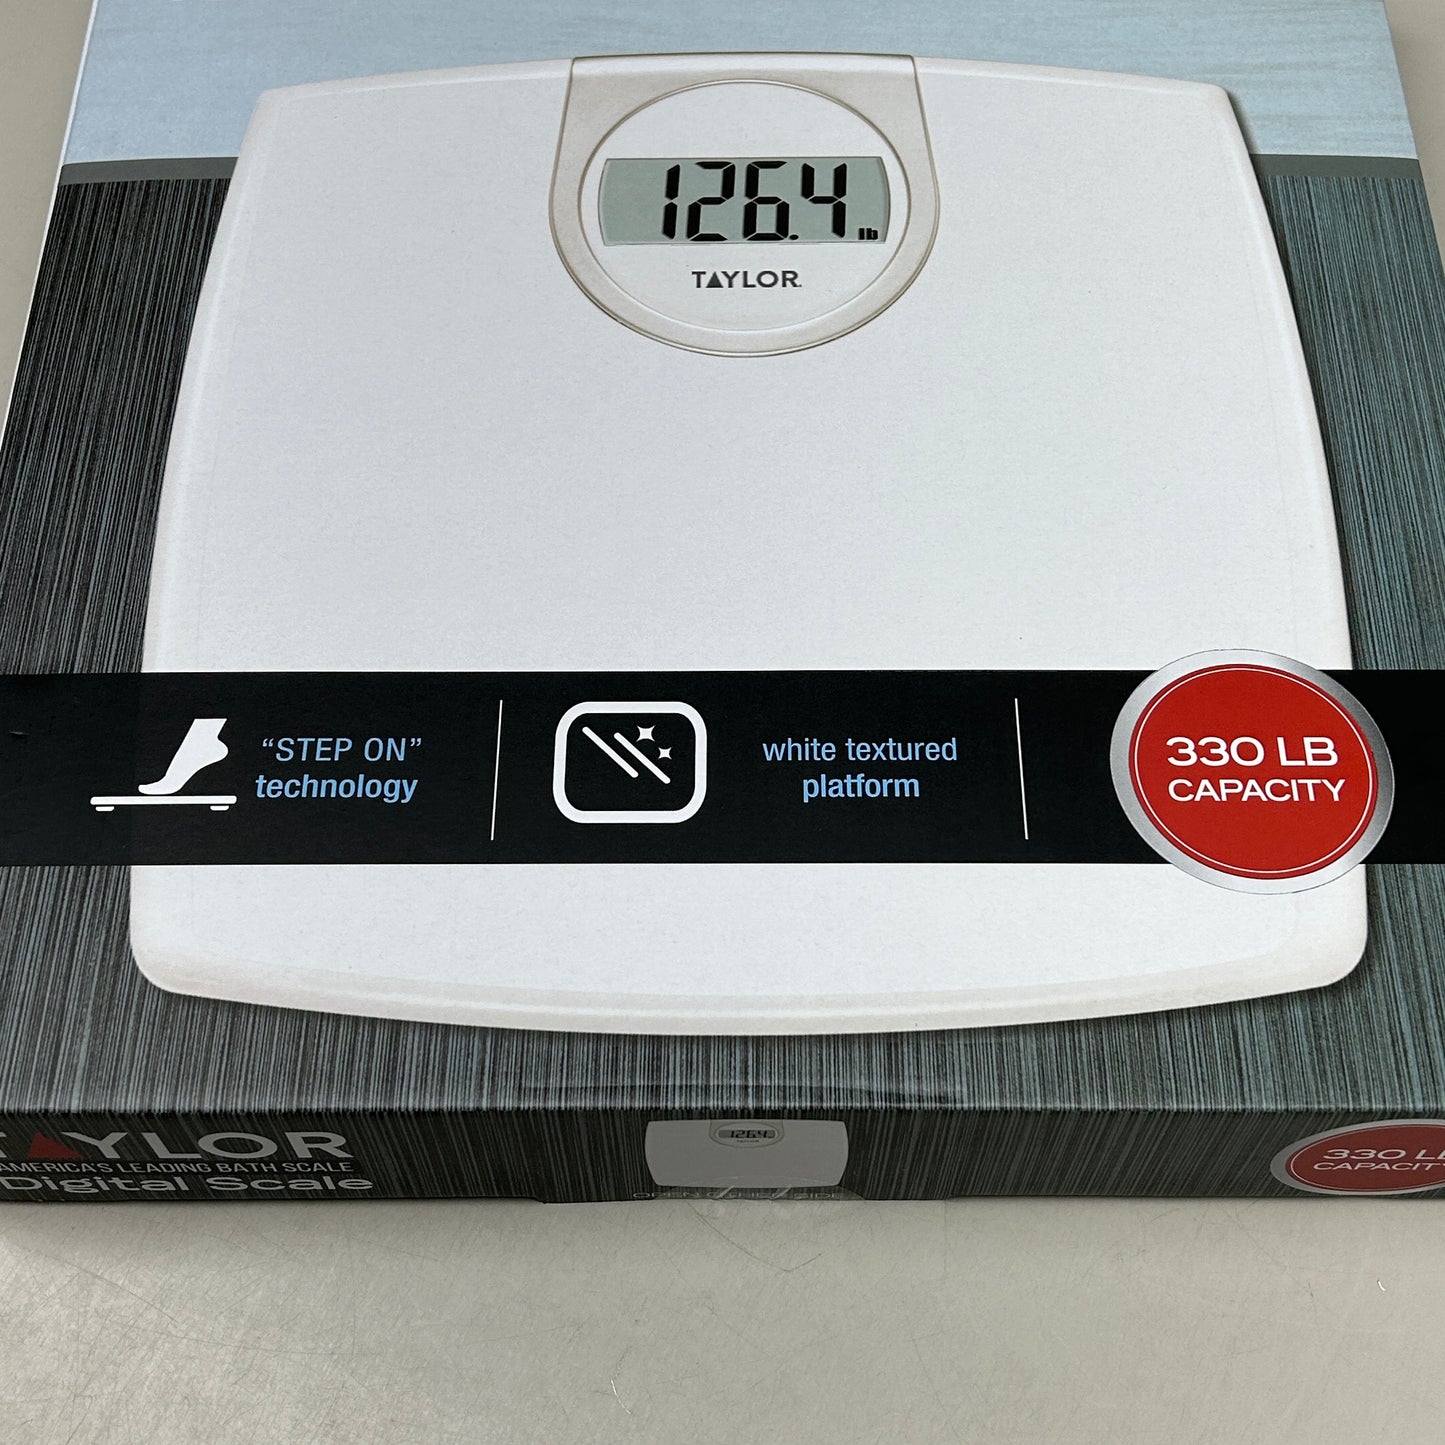 TAYLOR Digital Bathroom Scale White Textured Finish 702940133 (New)